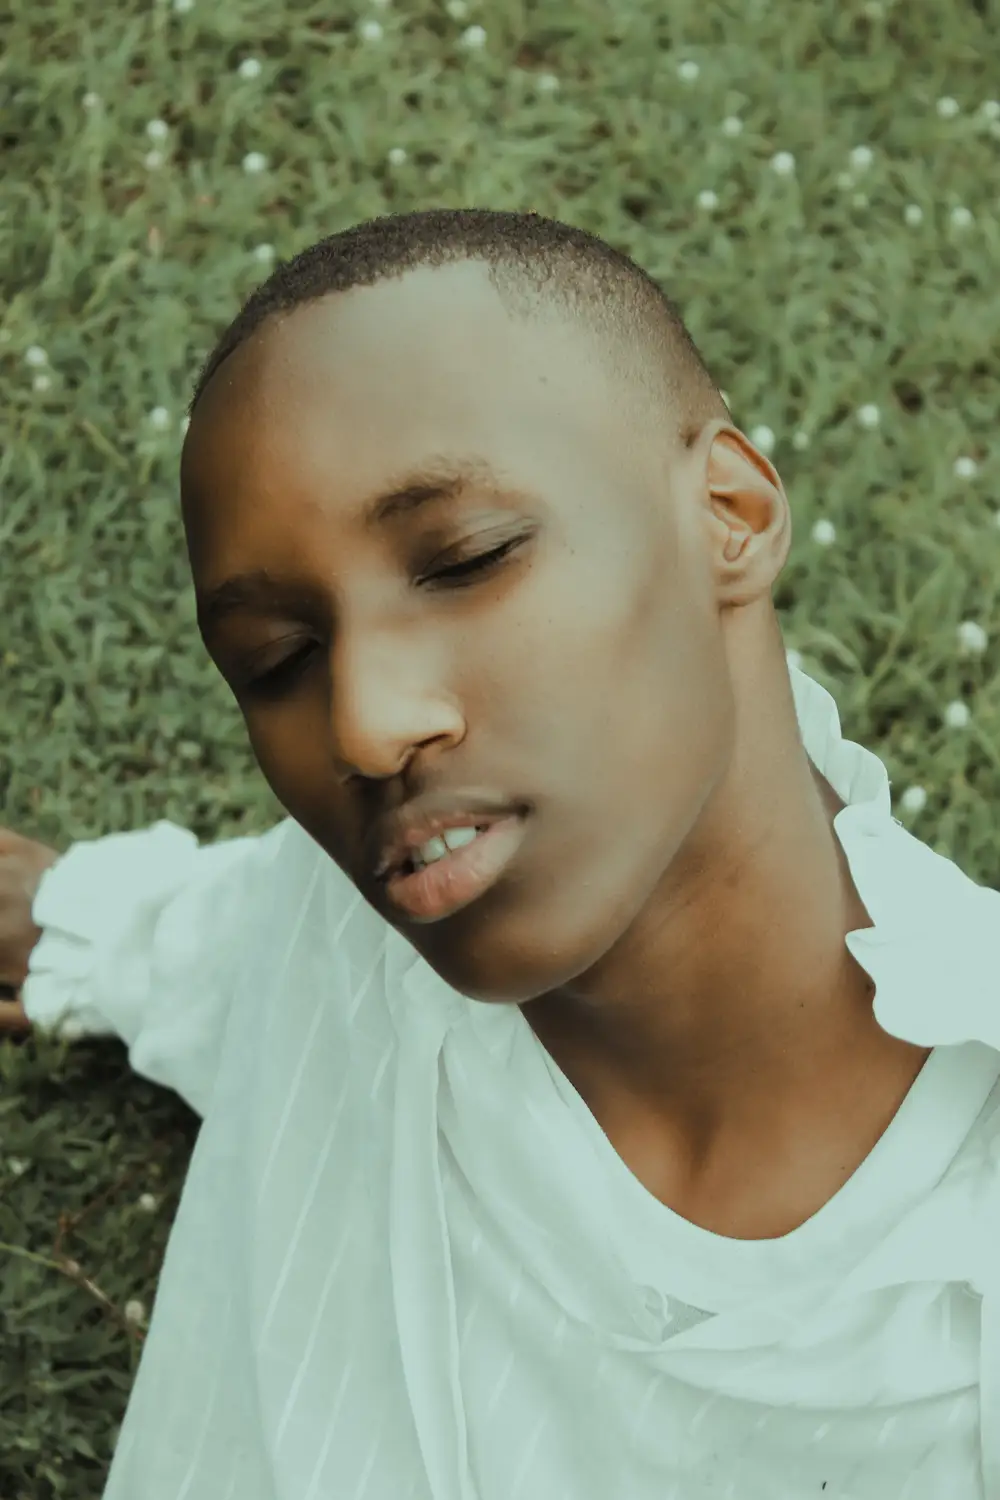 Man Lying on Grass With Eyes Closed